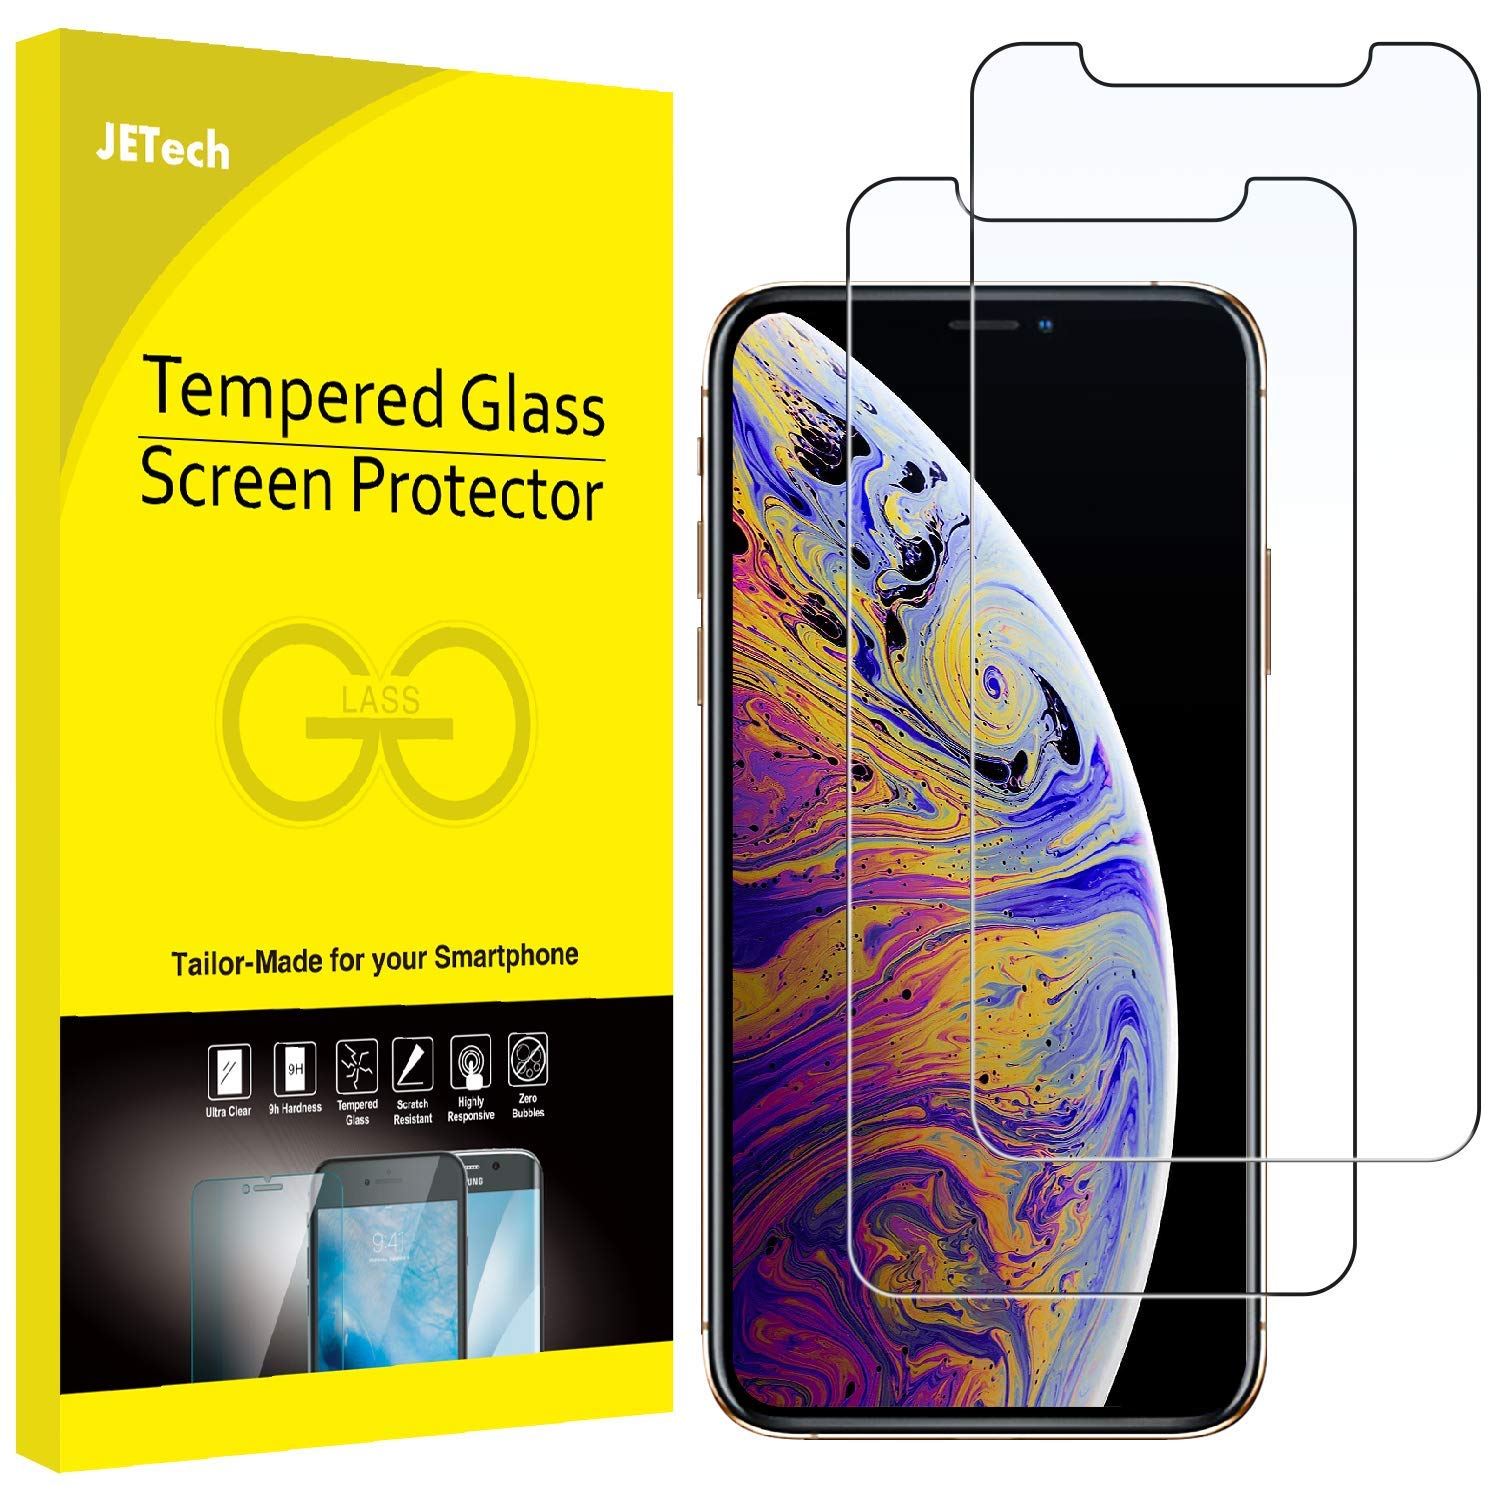 JETech Screen Protector for Apple iPhone Xs Max